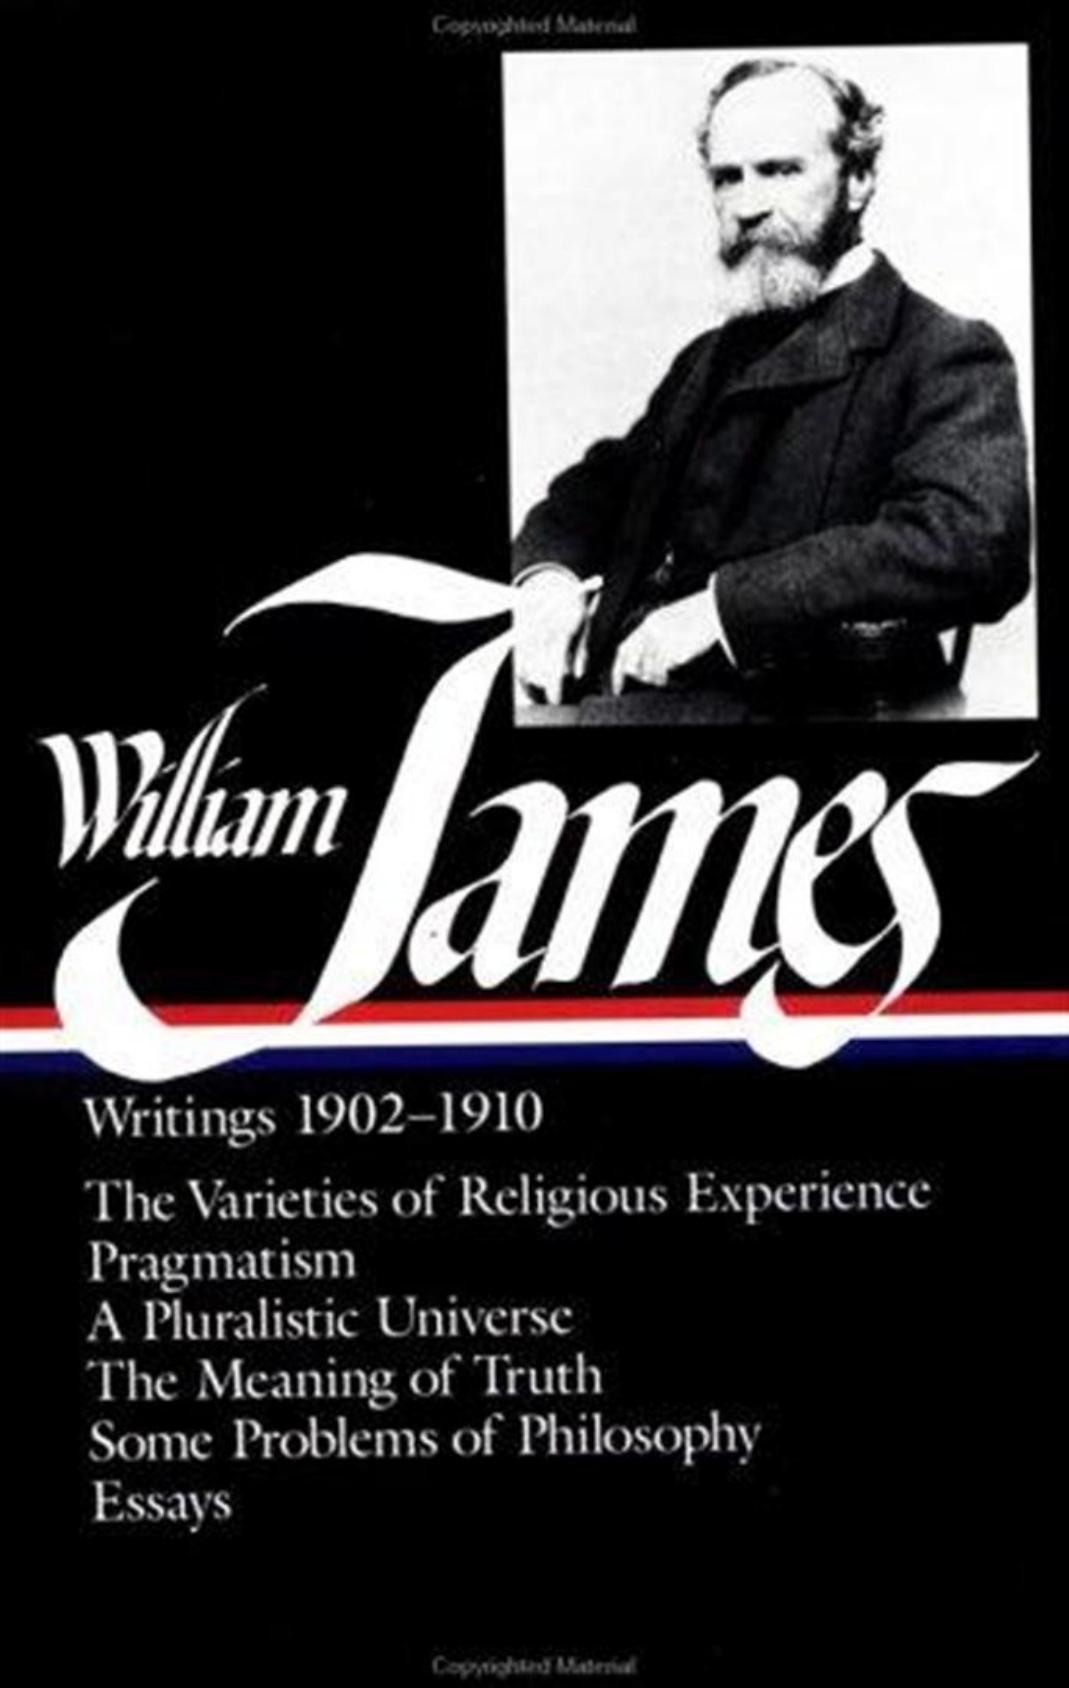 William James: Writings 1902-1910 (LOA #38): The Varieties of Religious Experience / Pragmatism / a Pluralistic Universe / the Meaning of Truth / Some Problems of Philosophy / Essays